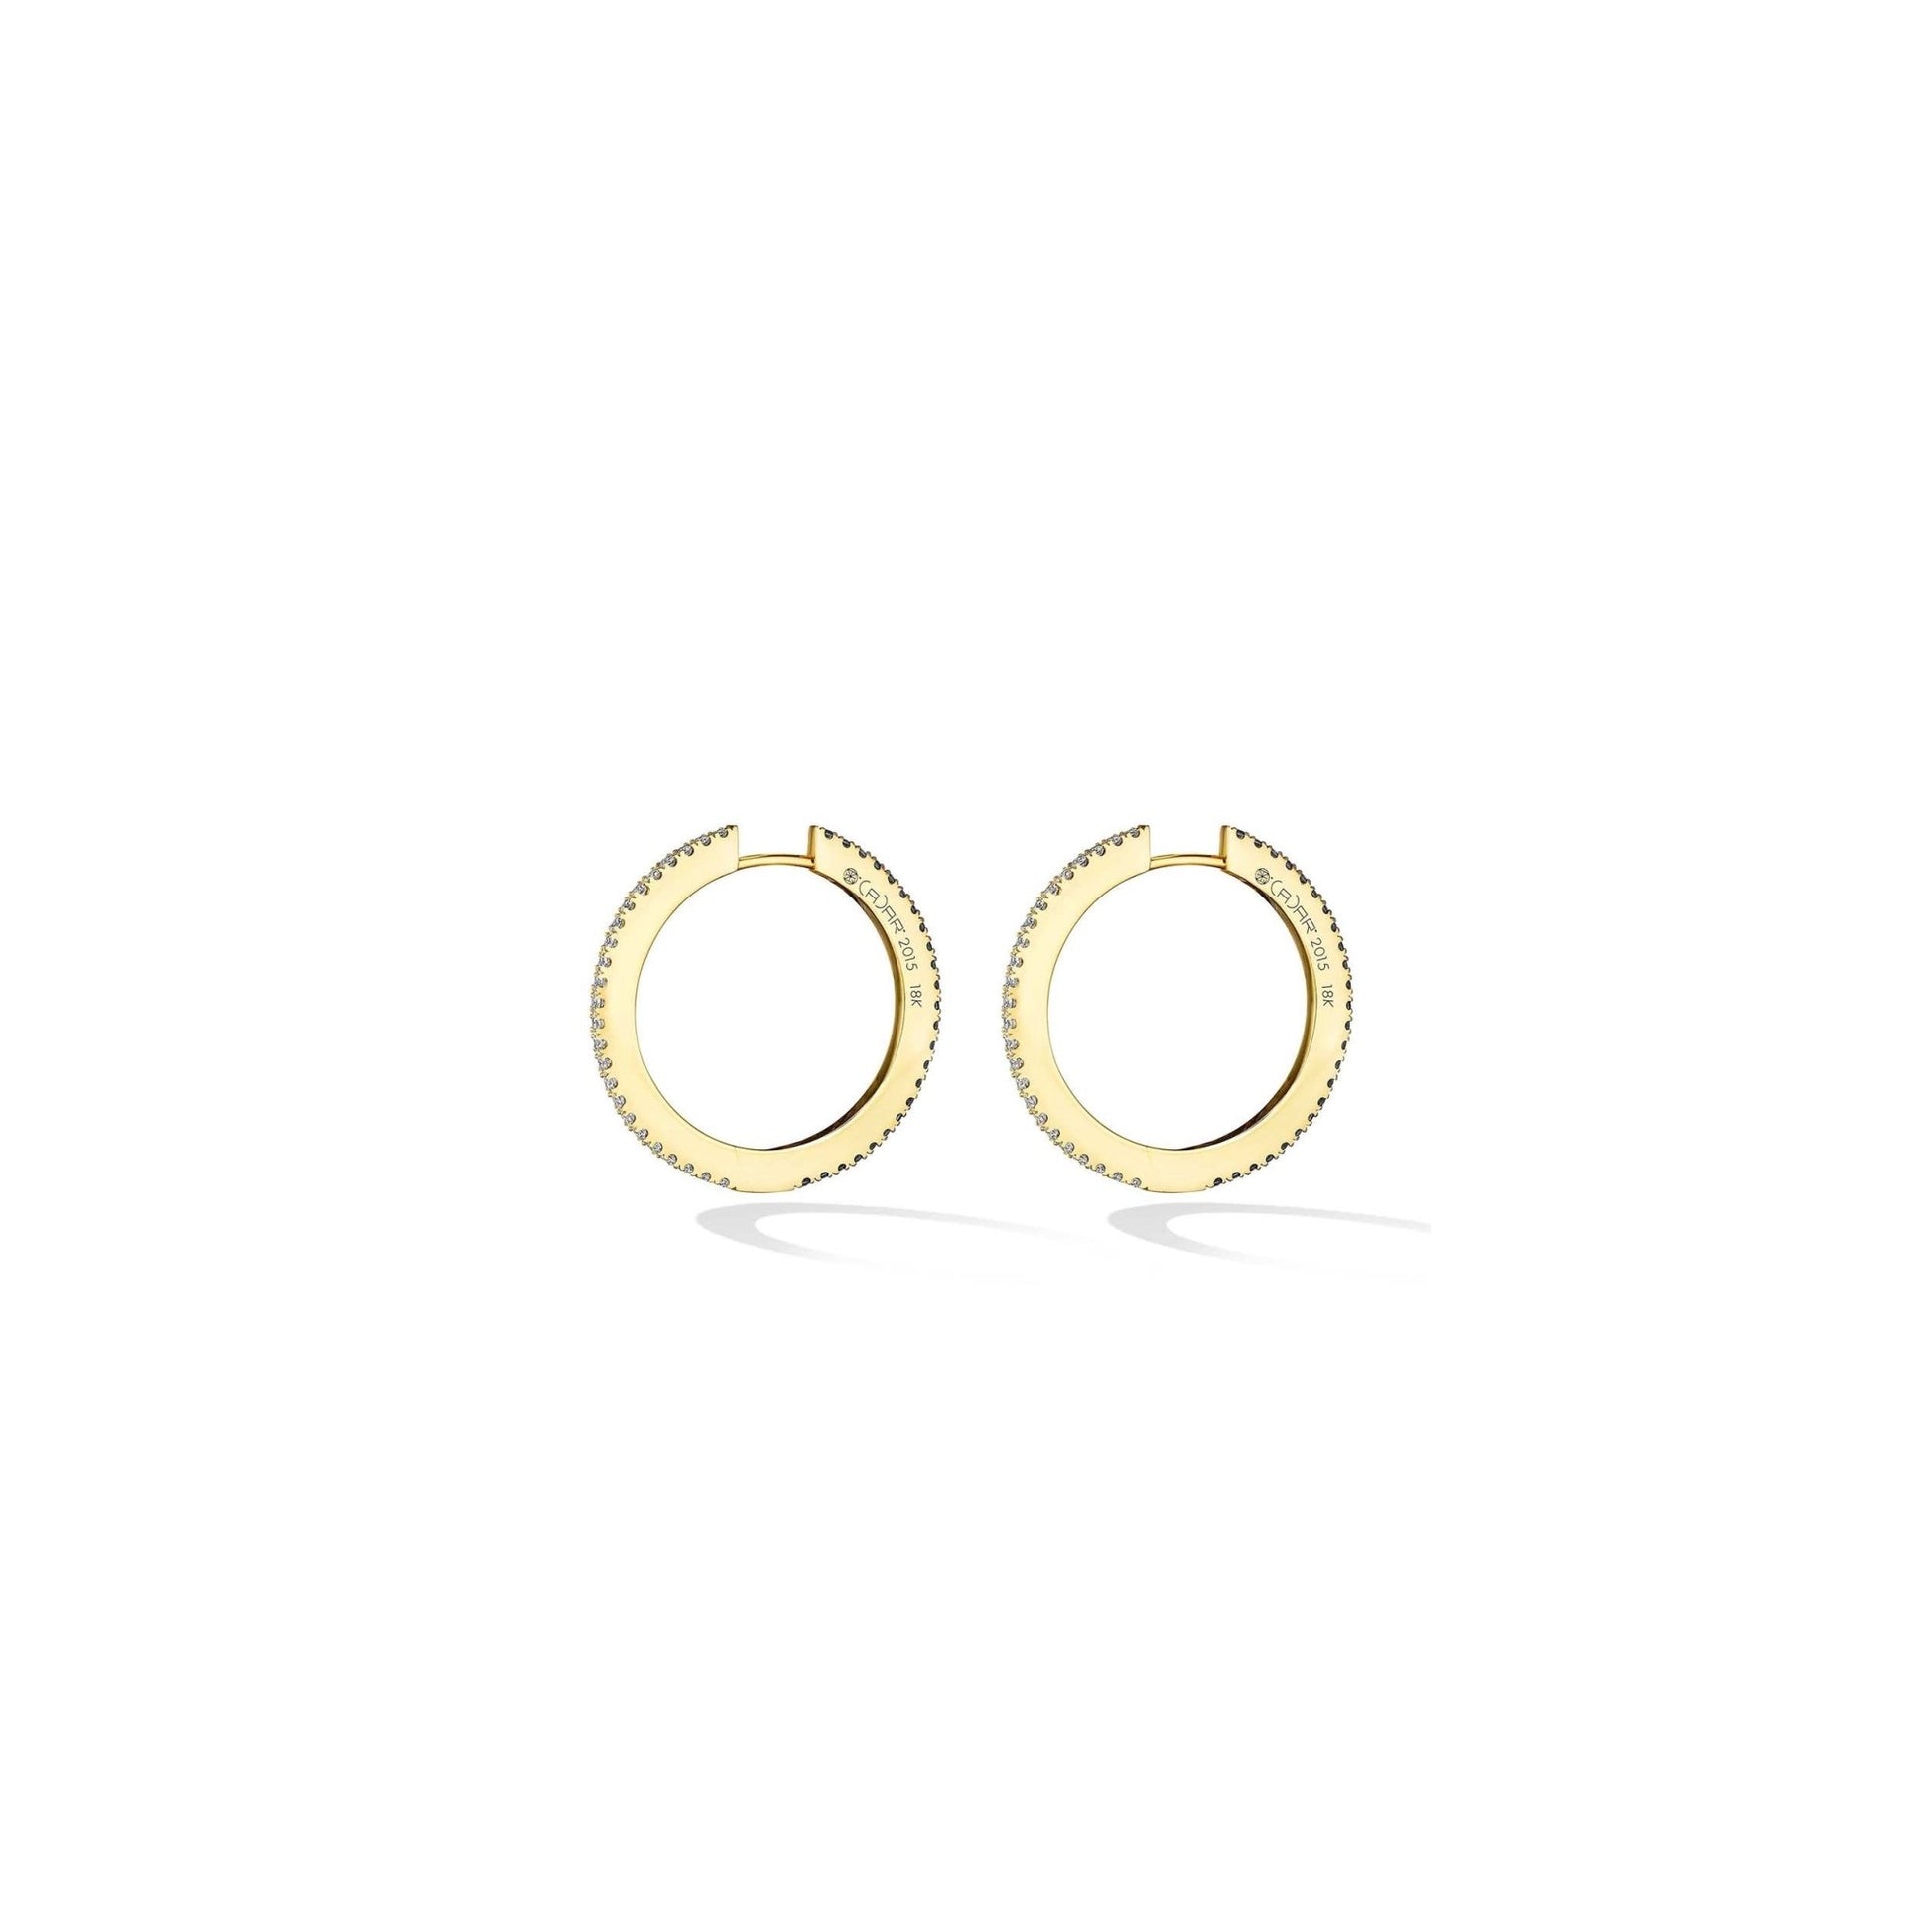 Medium Yellow Gold Solo Hoop Earrings with White and Black Diamonds - Cadar